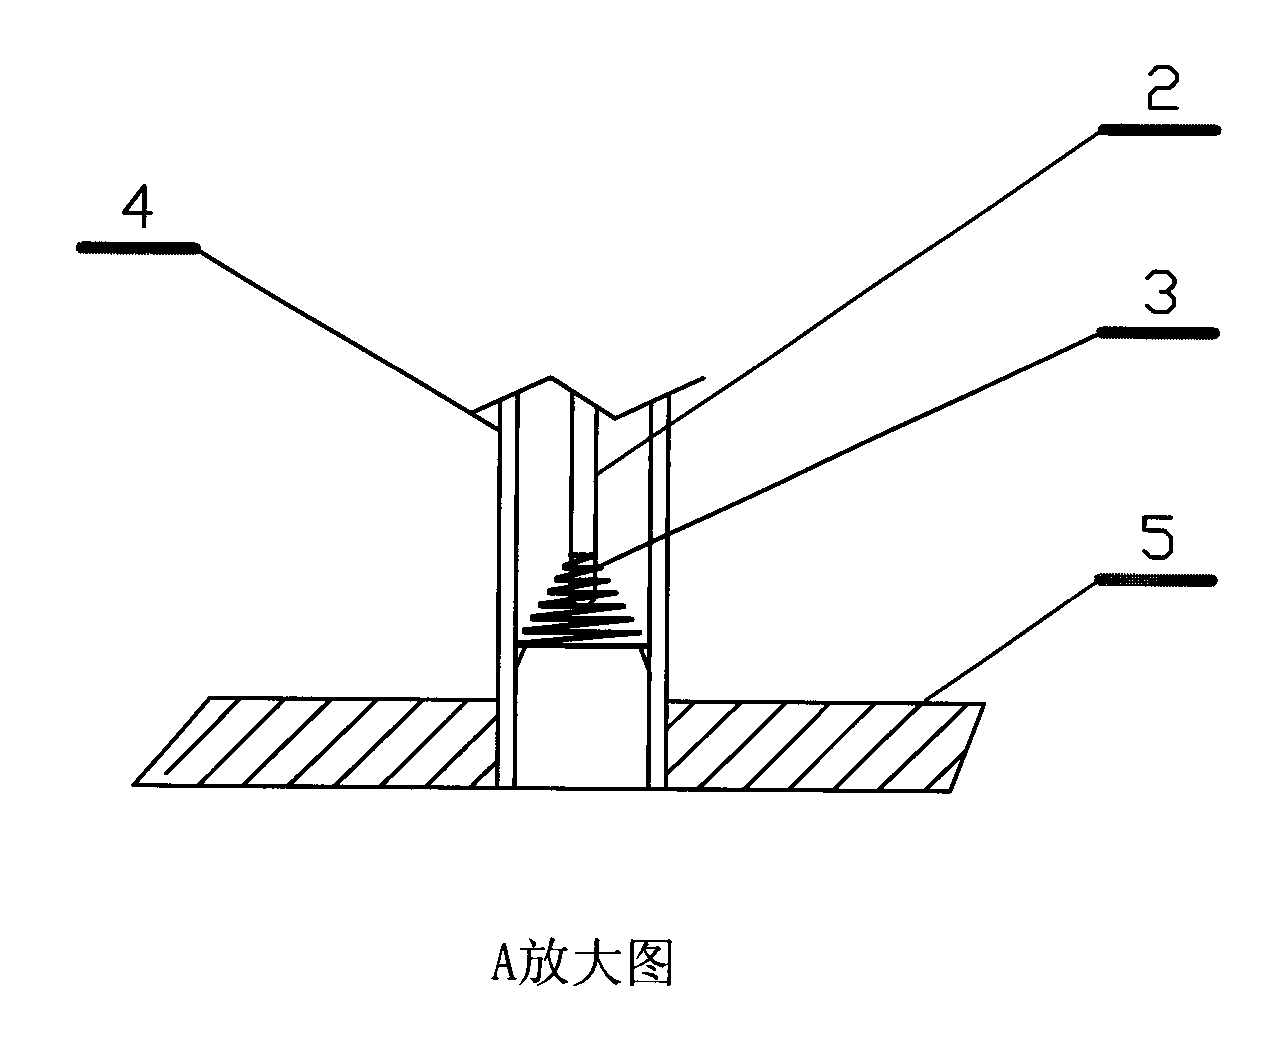 Device for installing thermocouple on reactor in propenoic acid production